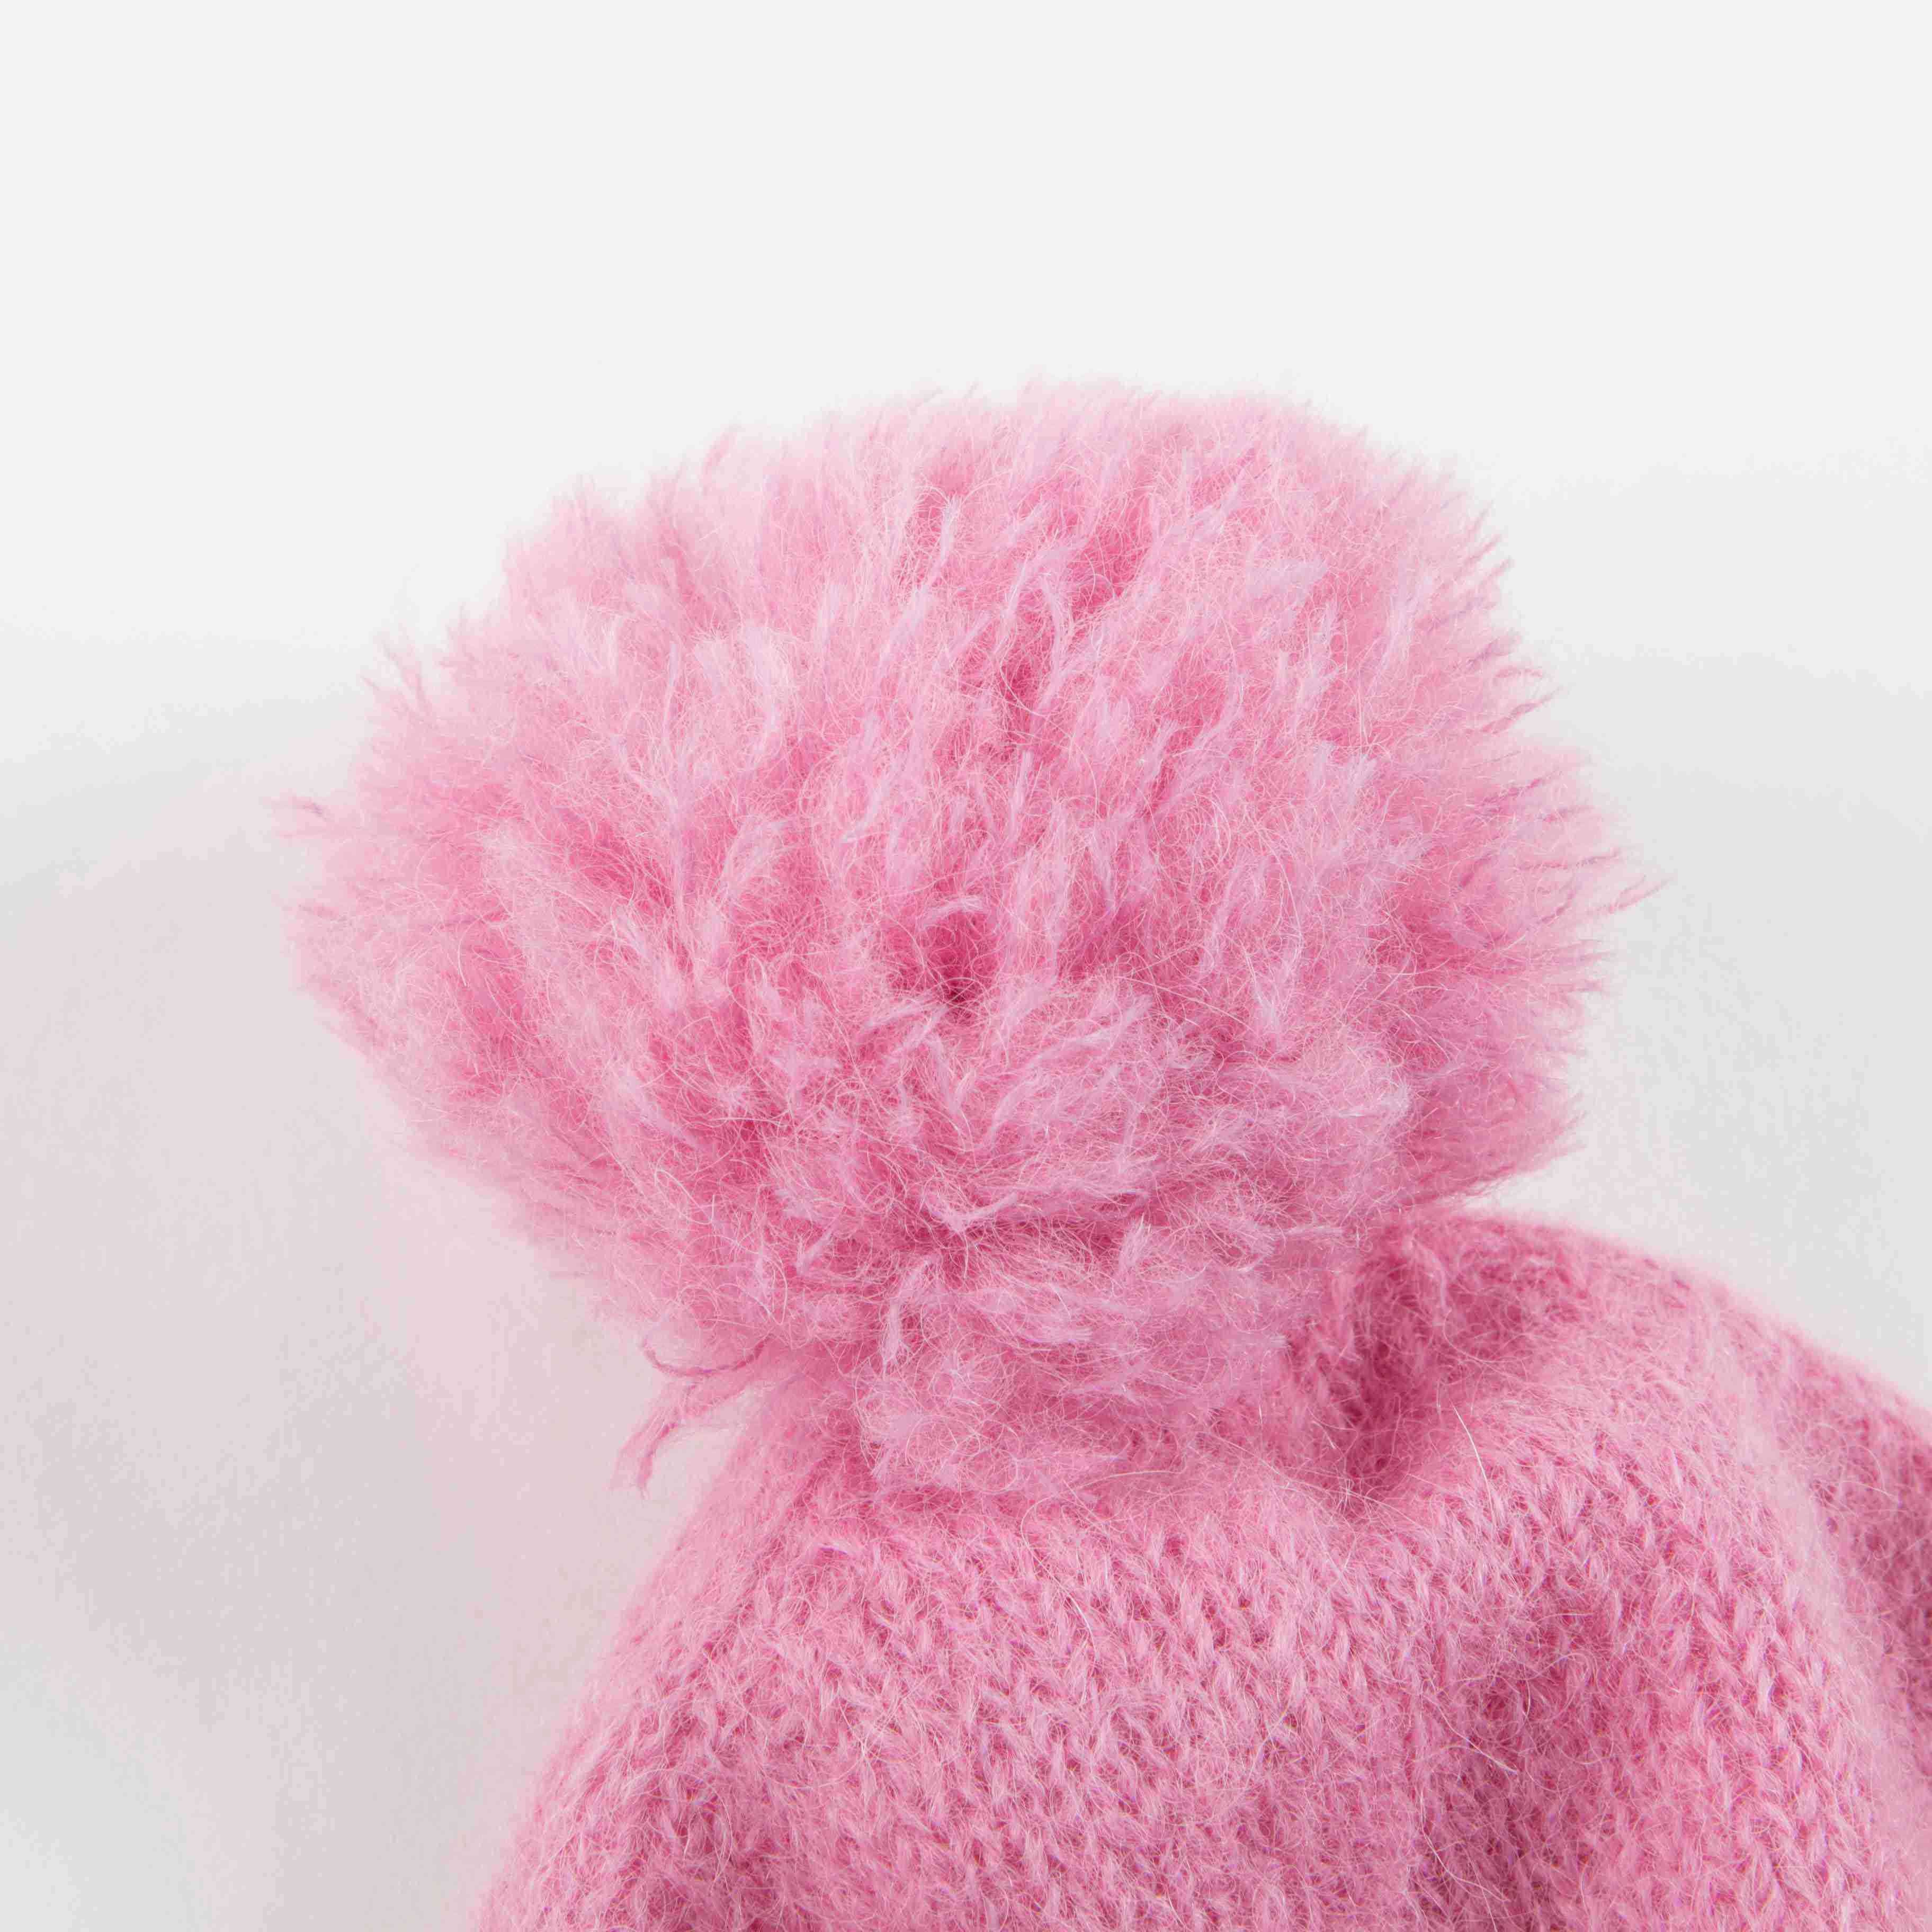 Baby Pink Knitted Hat